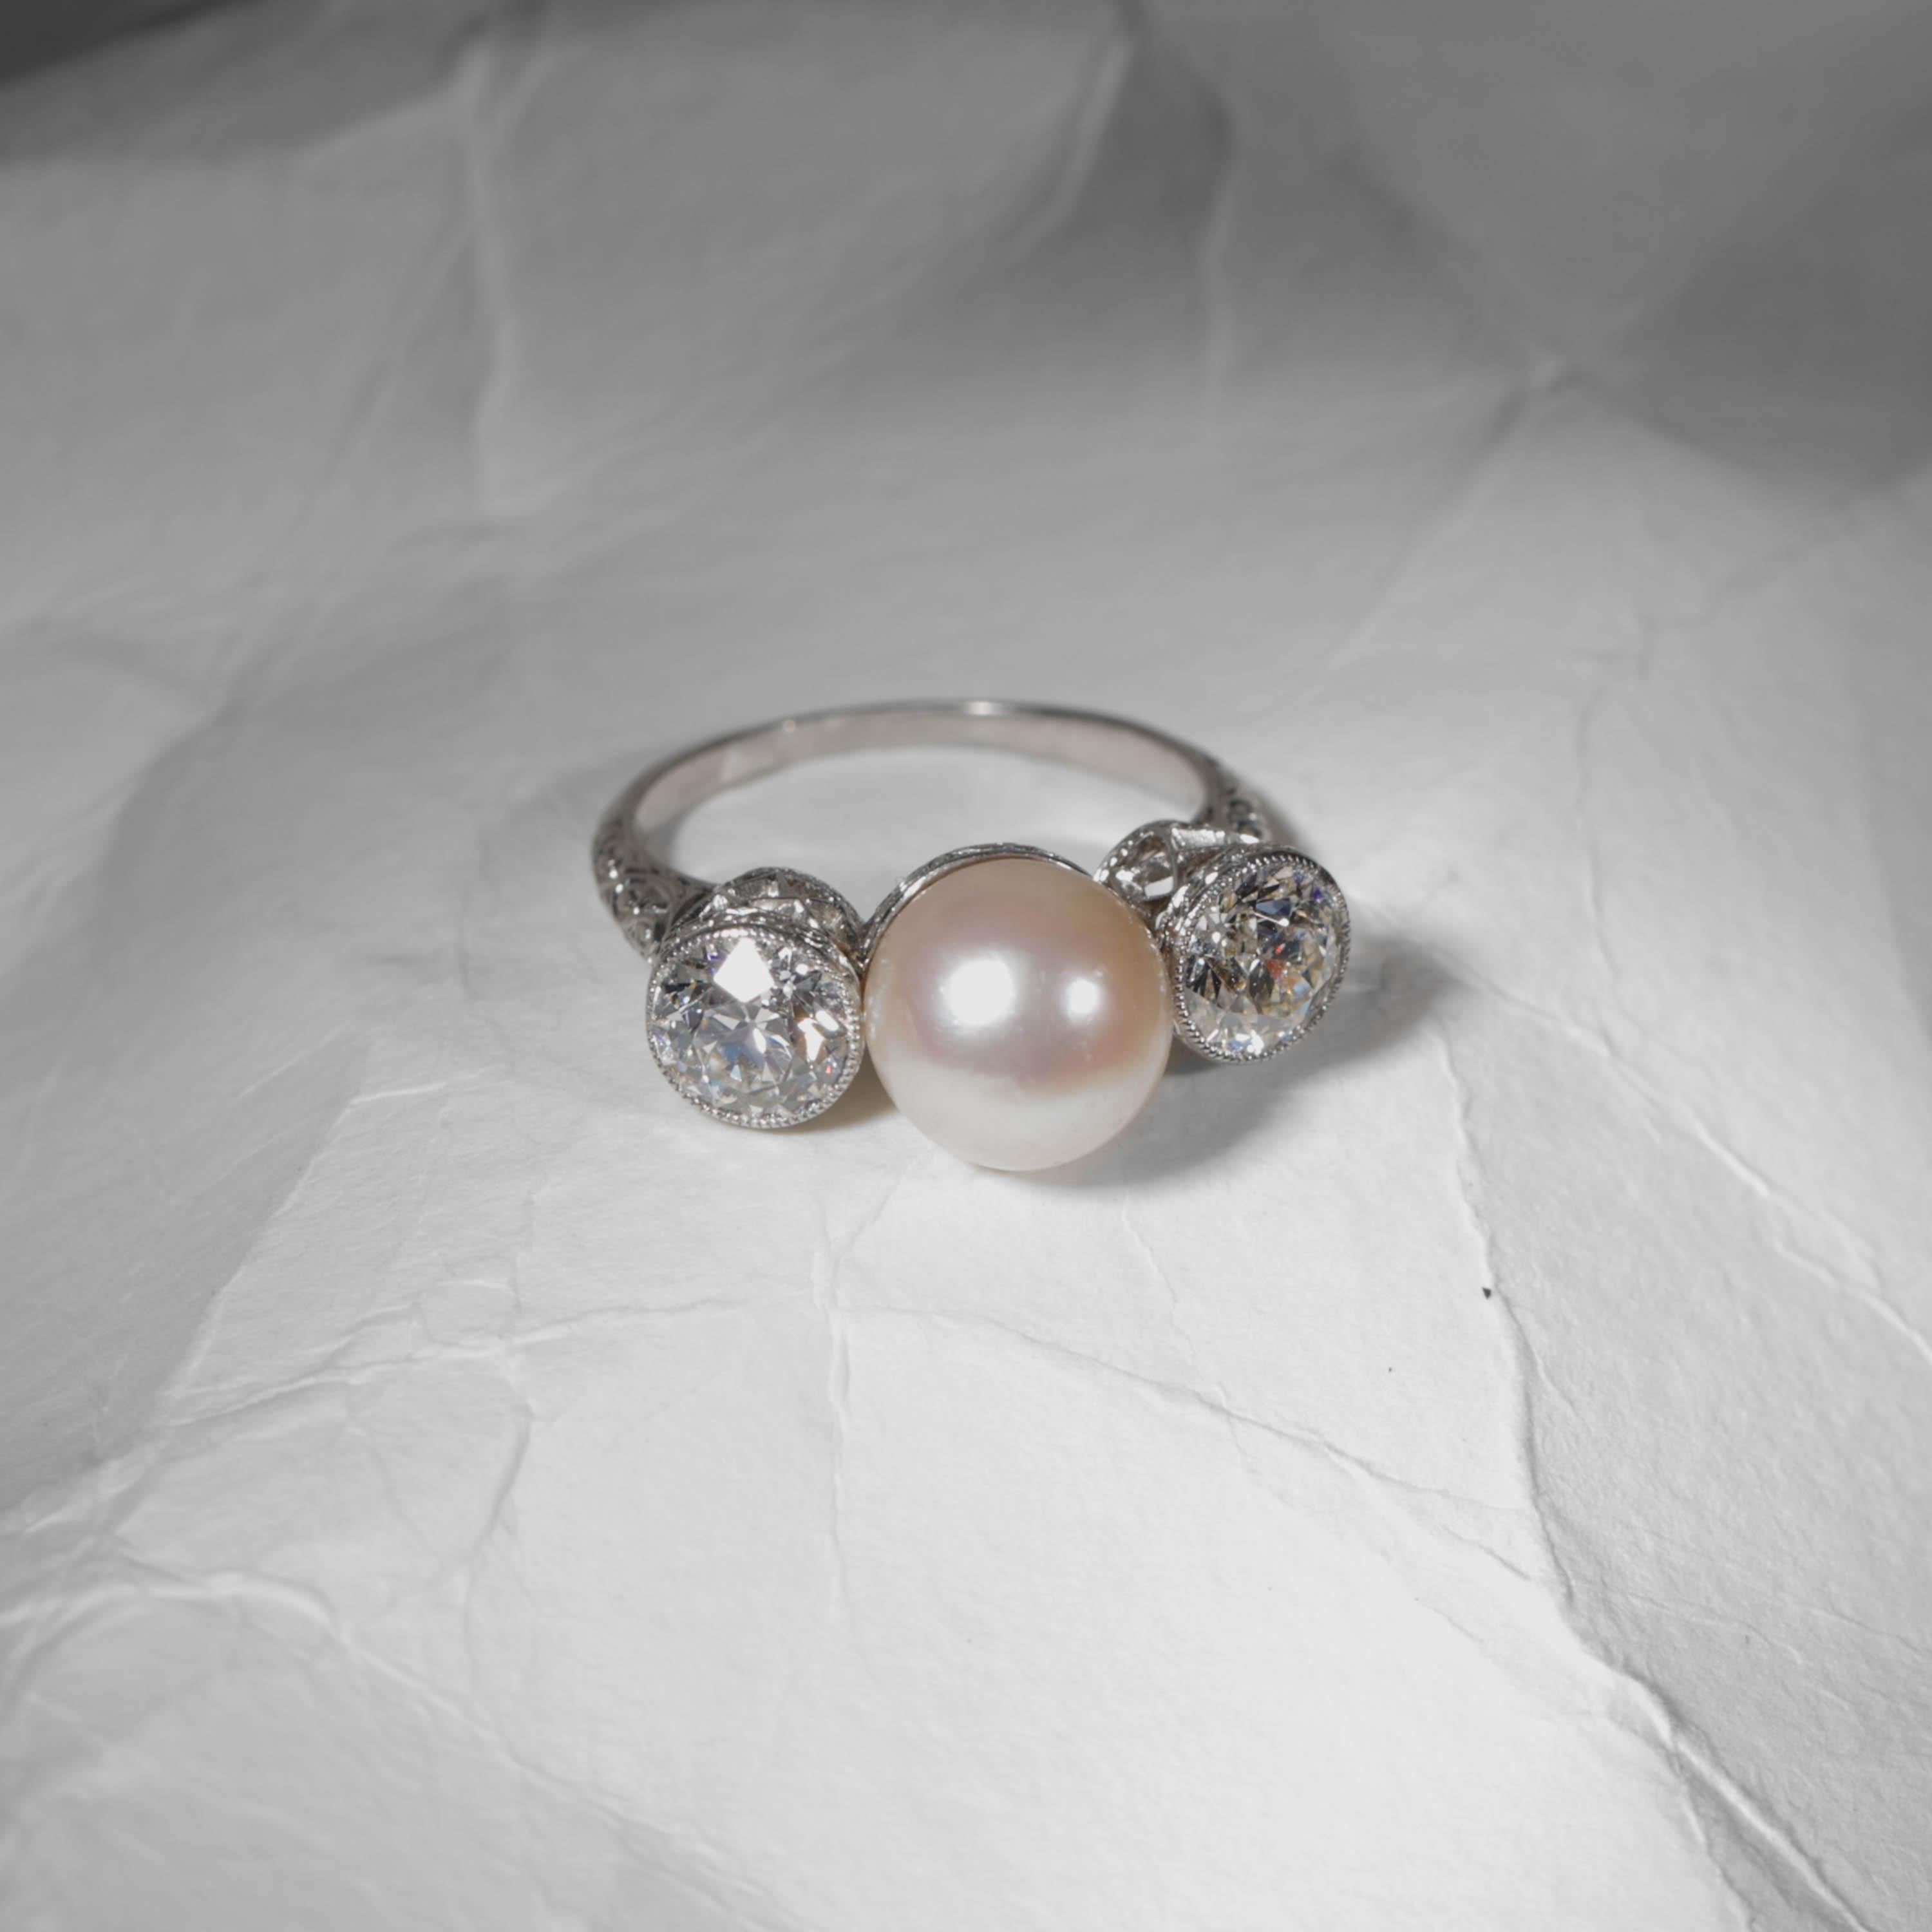 Diamond, Pearl Ring GIA Certified Natural, Edwardian, Black Starr and Frost For Sale 6